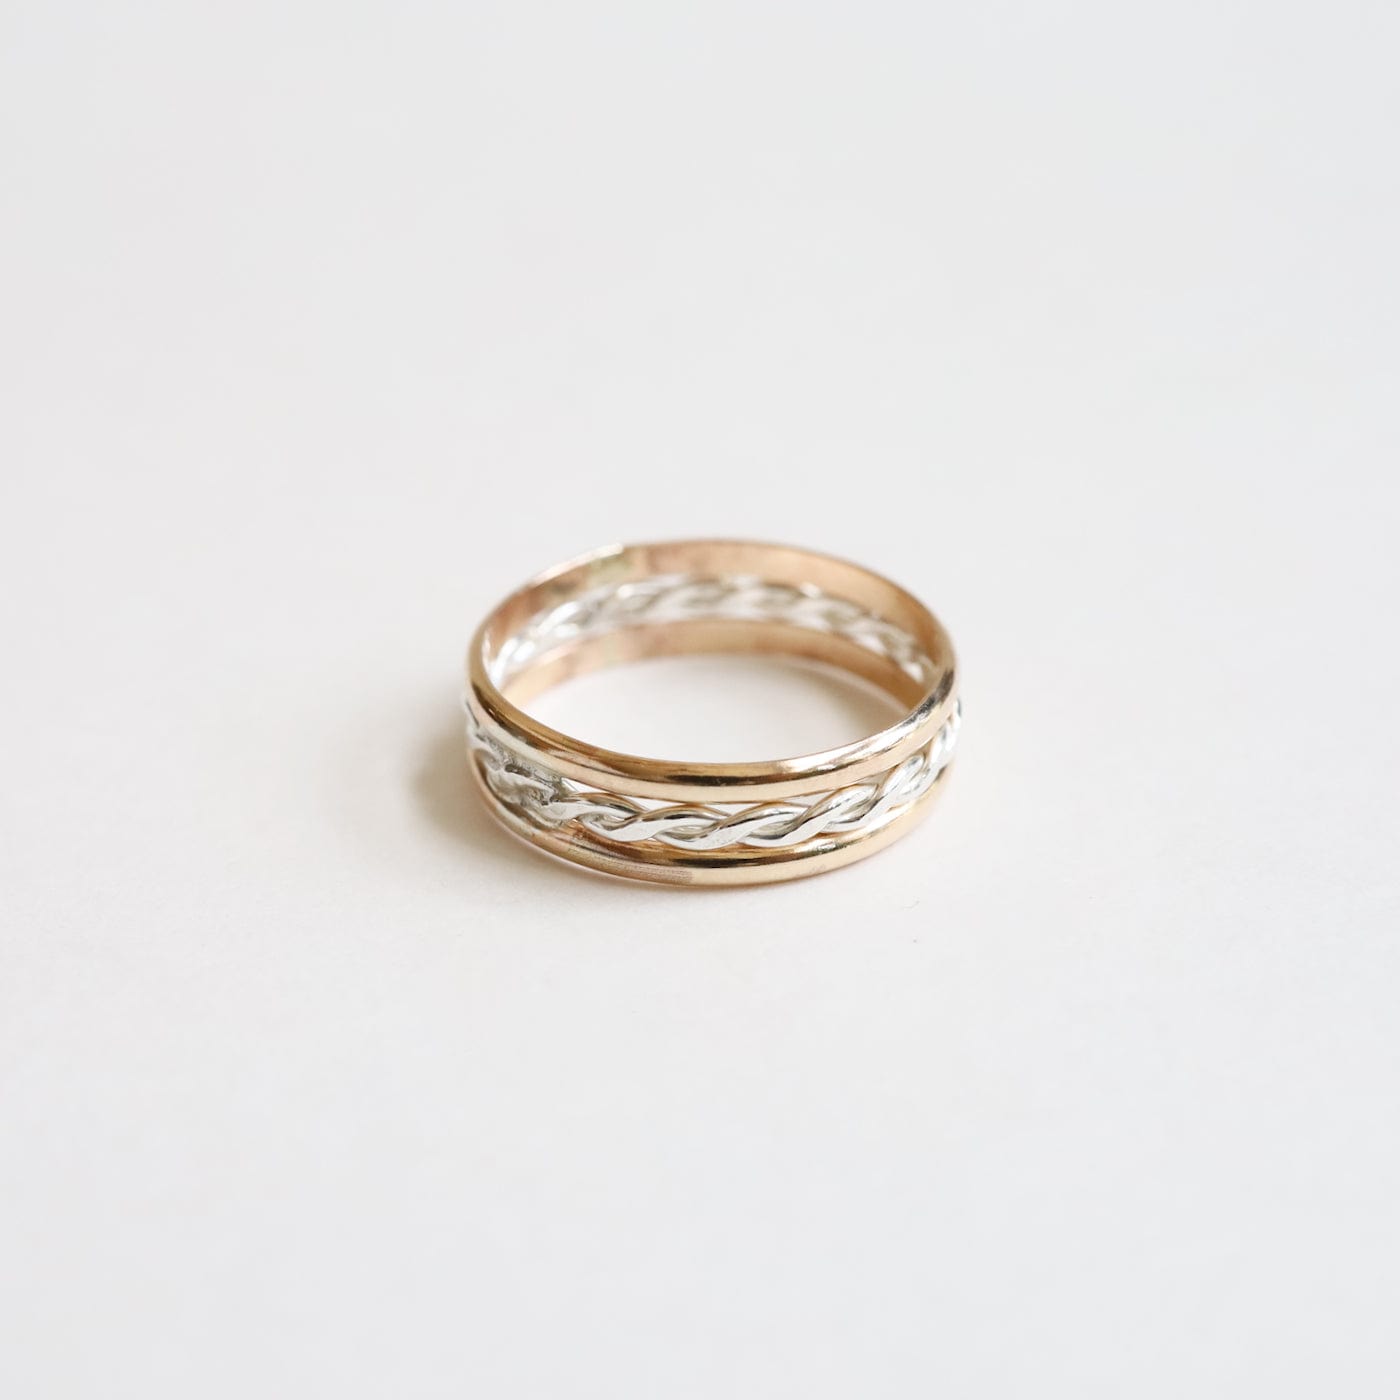 RNG 3 Band Stacked Ring - Gold Filled with Silver Twist